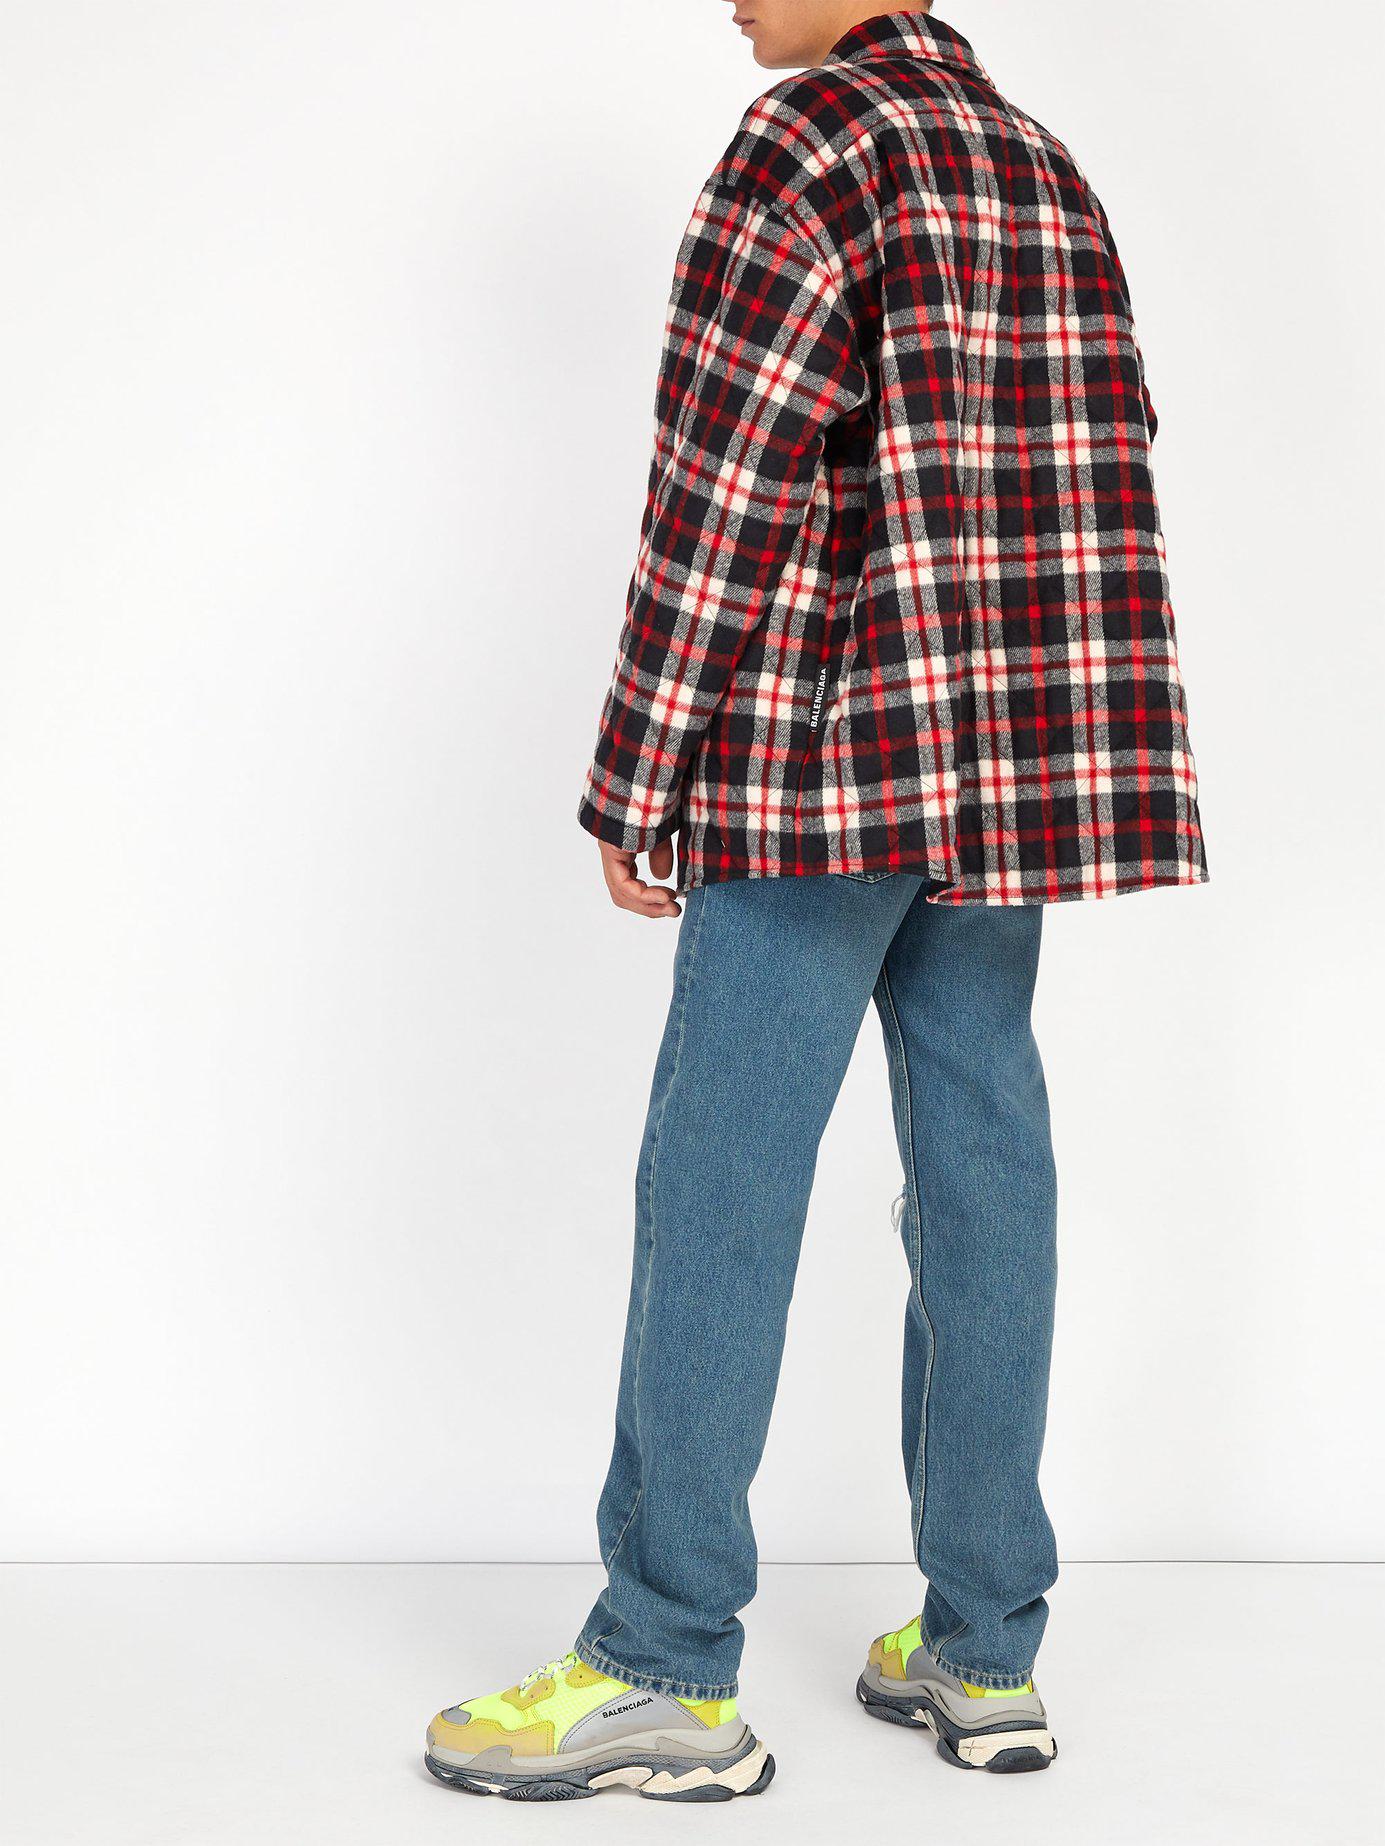 Balenciaga Quilted Plaid Coat in Red for Men | Lyst